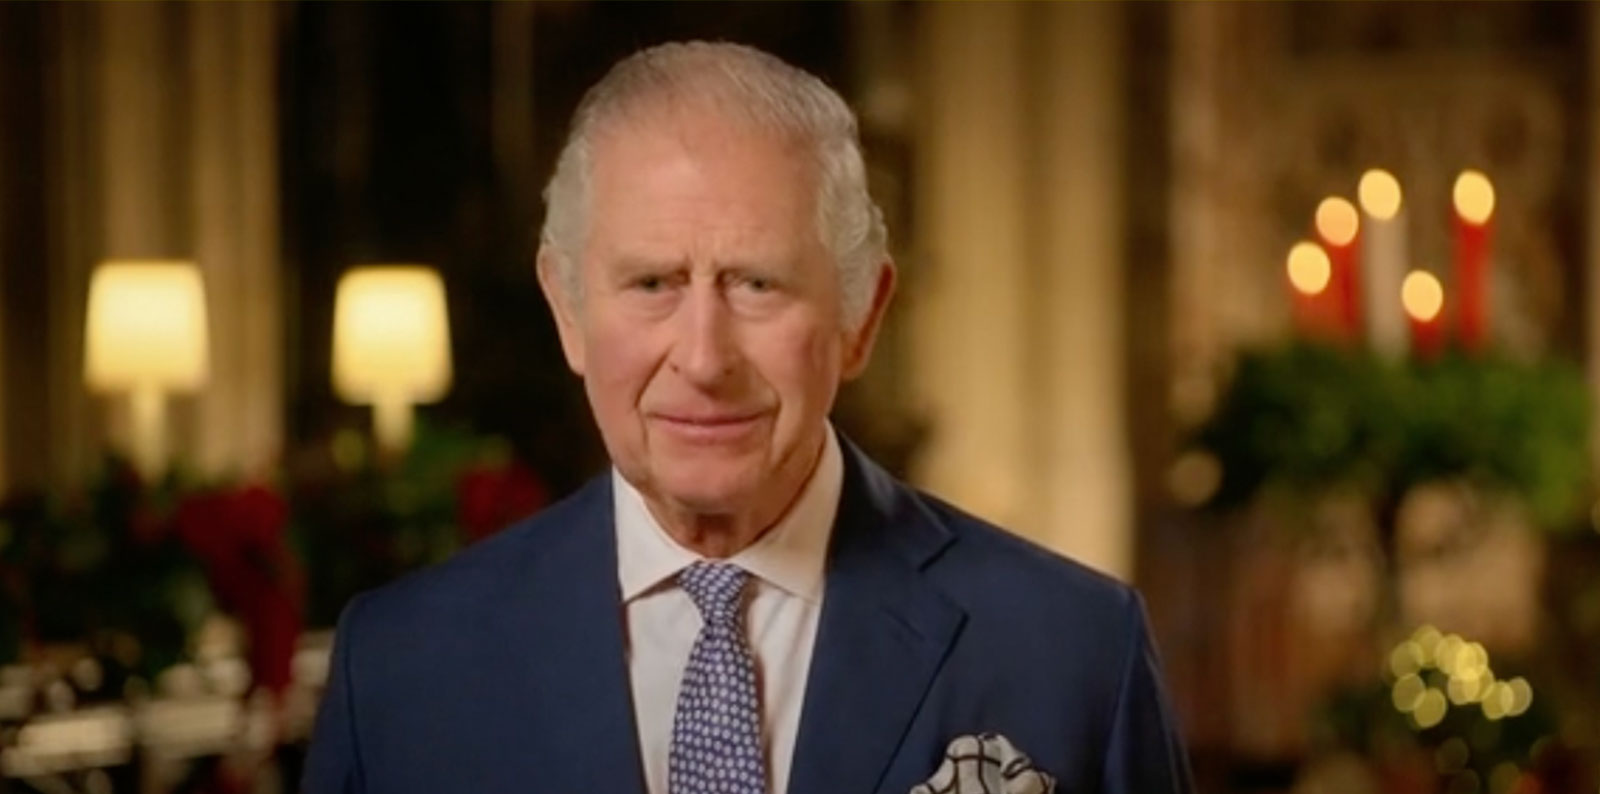 King Charles III: The New Monarchy Featured, Reviews Film Threat